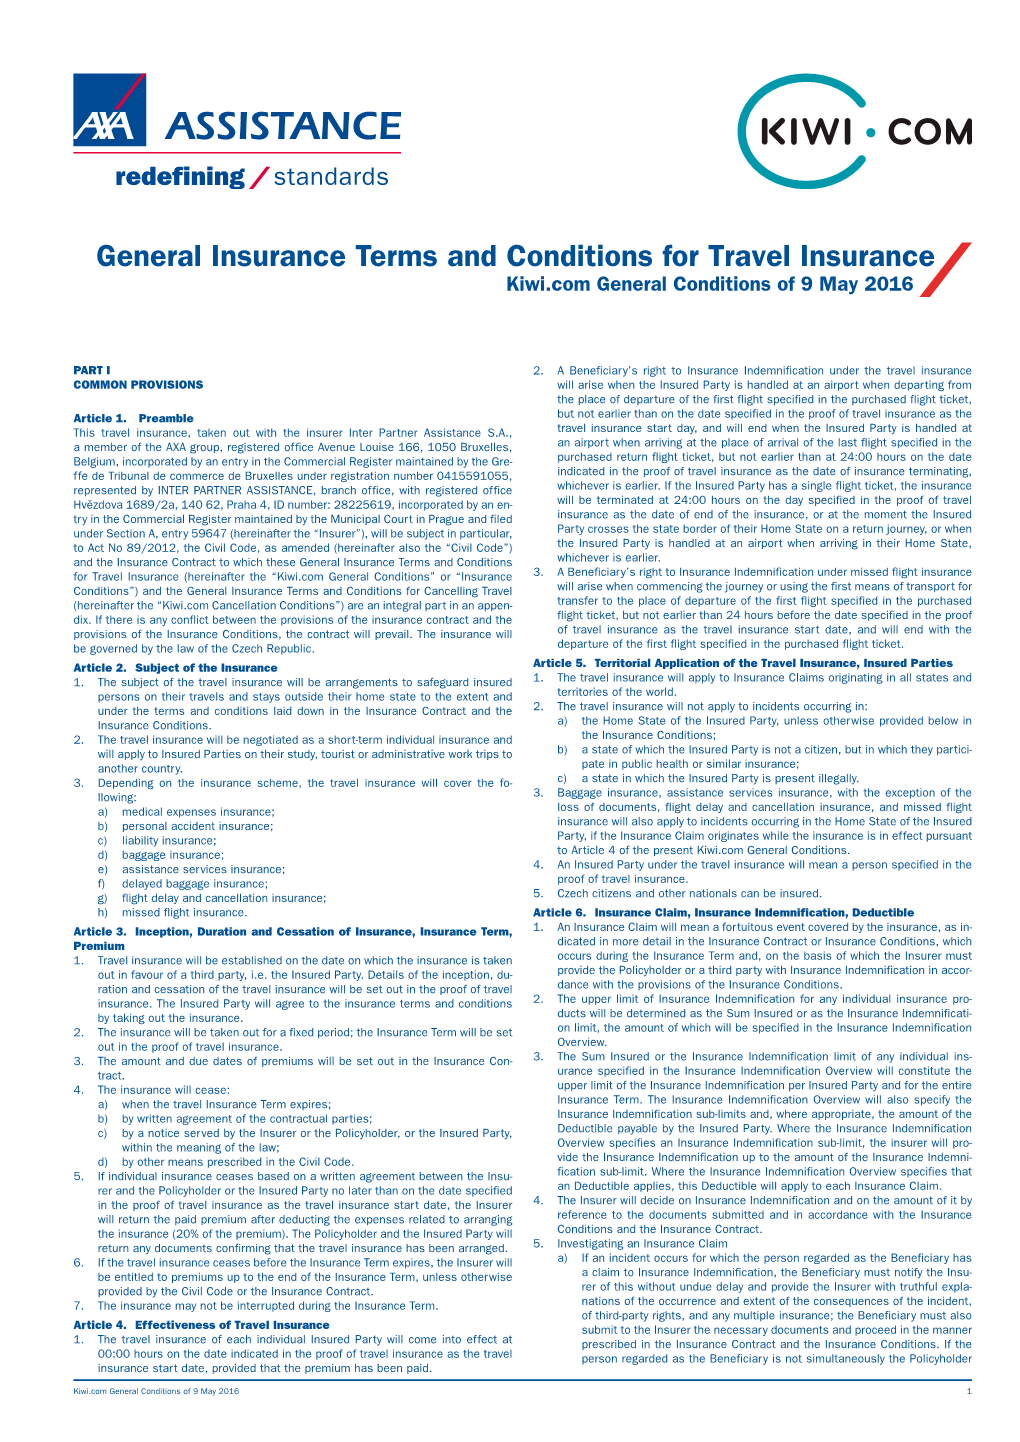 General Insurance Terms and Conditions for Travel Insurance Kiwi.Com General Conditions of 9 May 2016